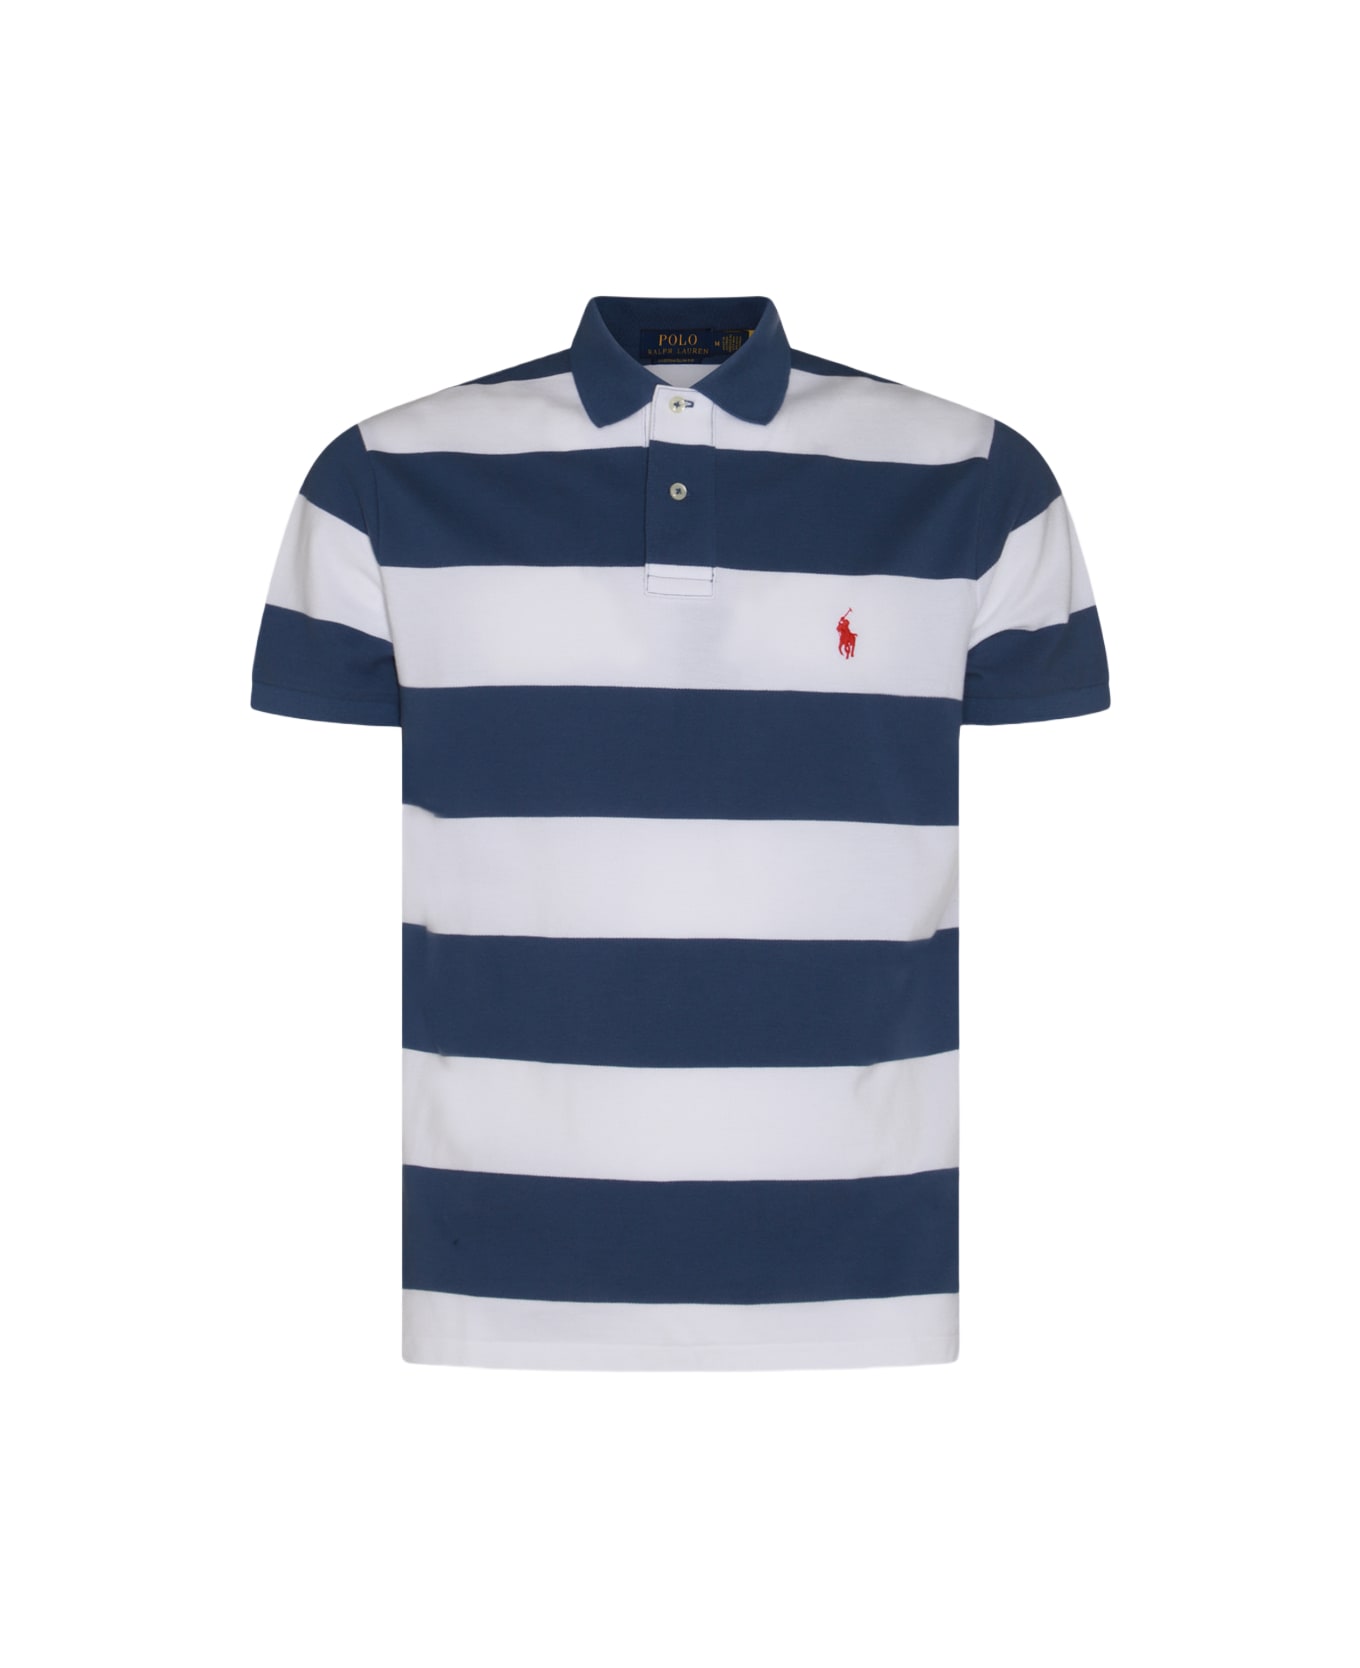 Polo Ralph Lauren White And Blue Cotton Polo Shirt - OLD ROYAL/WHITE